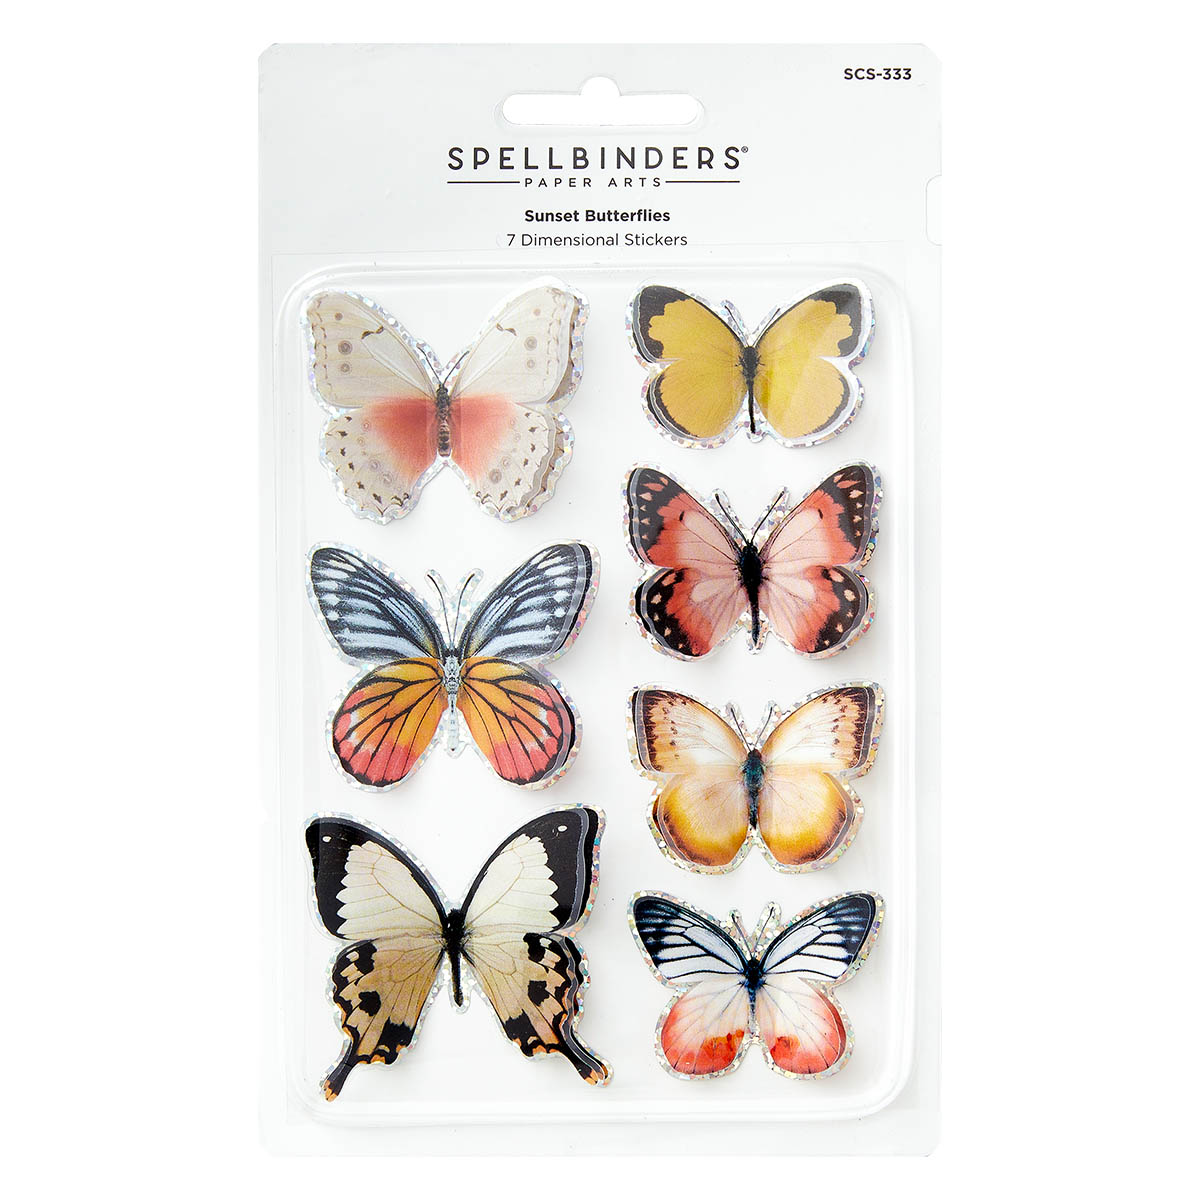 Spellbinders Sunset Butterflies Stickers From the Timeless Collection